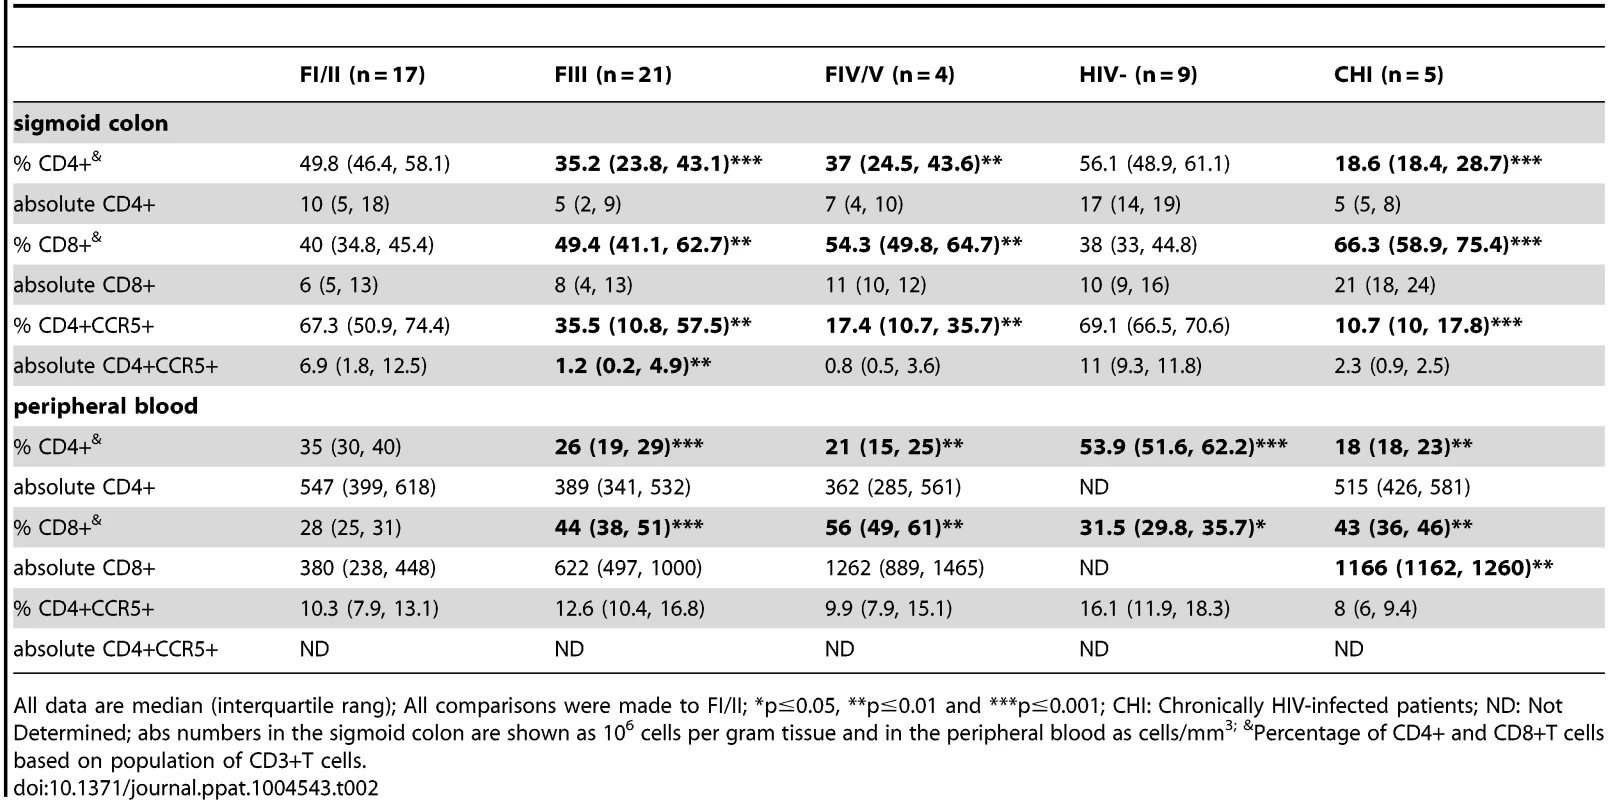 Proportion and absolute number of CD4+, CD4+CCR5+ and CD8+ T cells in sigmoid colon and peripheral blood at baseline in HIV-, FI/II, FIII, FIV/V and CHI subjects.